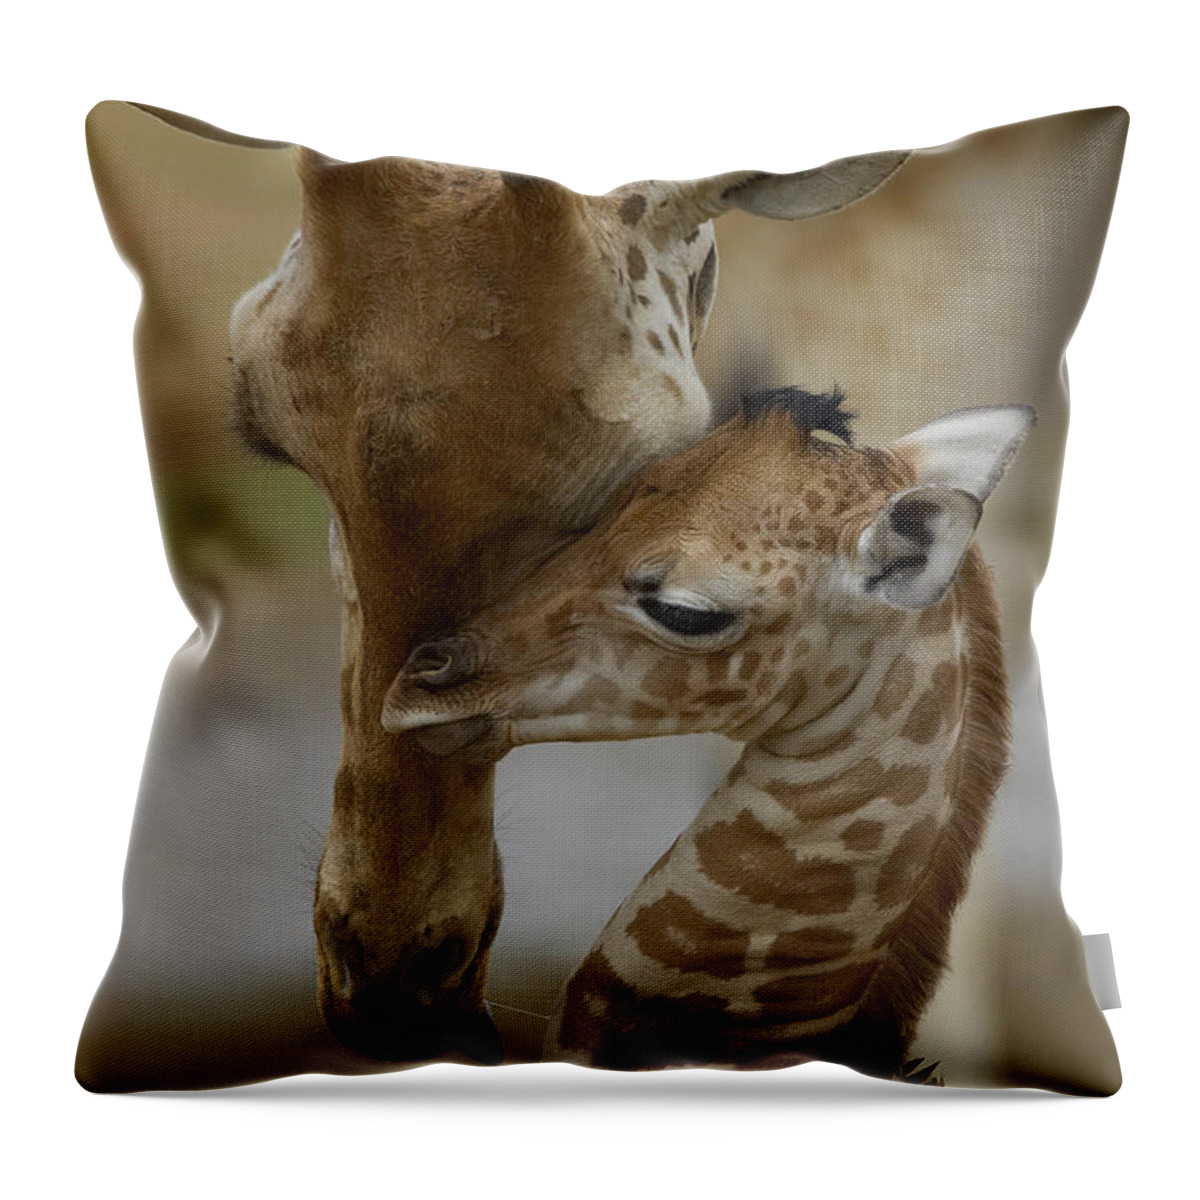 00119300 Throw Pillow featuring the photograph Rothschild Giraffes Nuzzling by San Diego Zoo